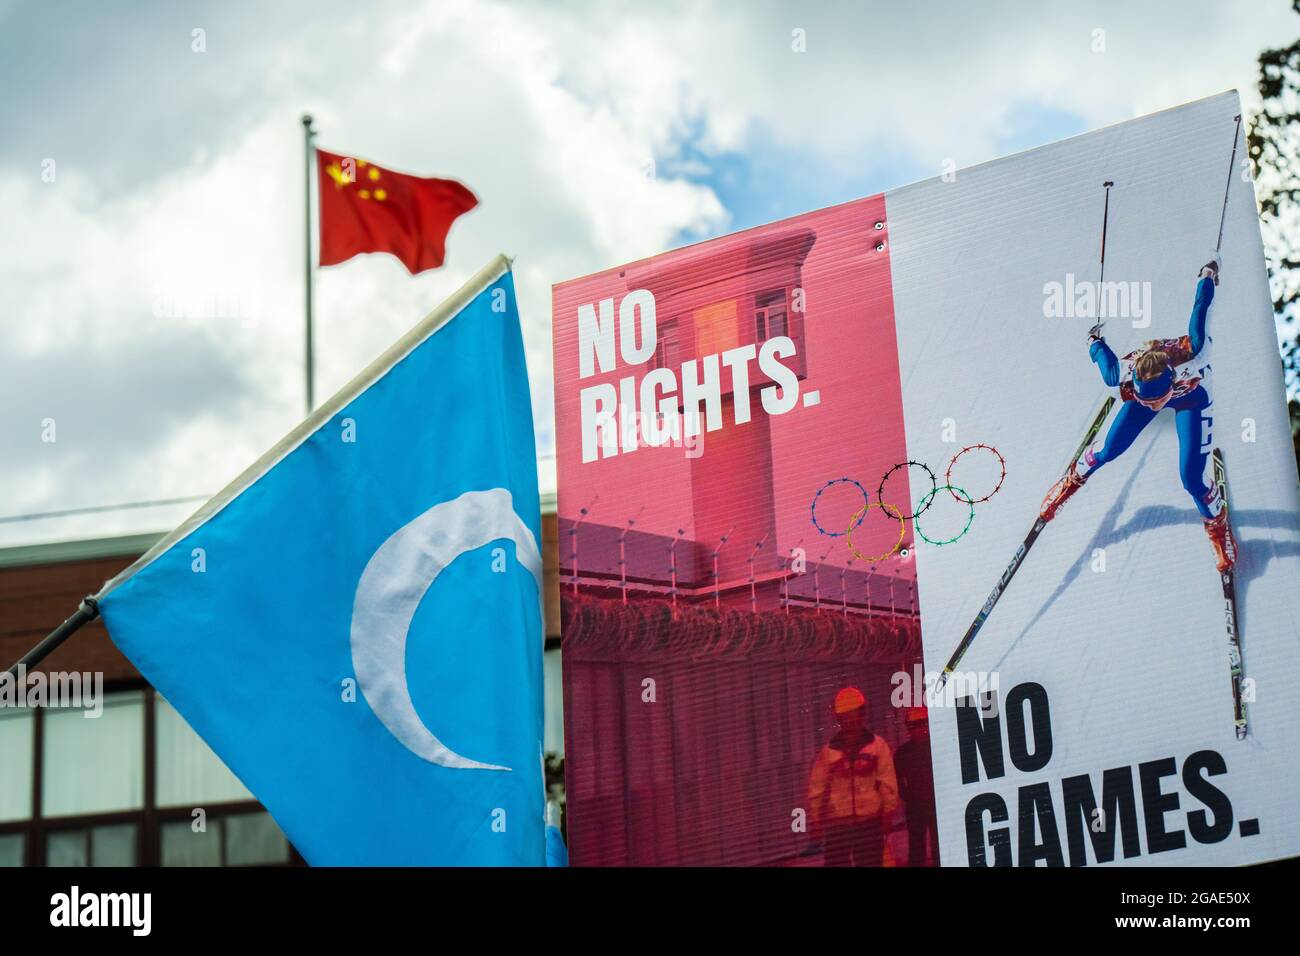 Protestors wave an East Turkistan (Uyghur) flag in front of the Chinese consulate in Toronto, ON, as they call for a boycott of the Beijing Olympics. Stock Photo